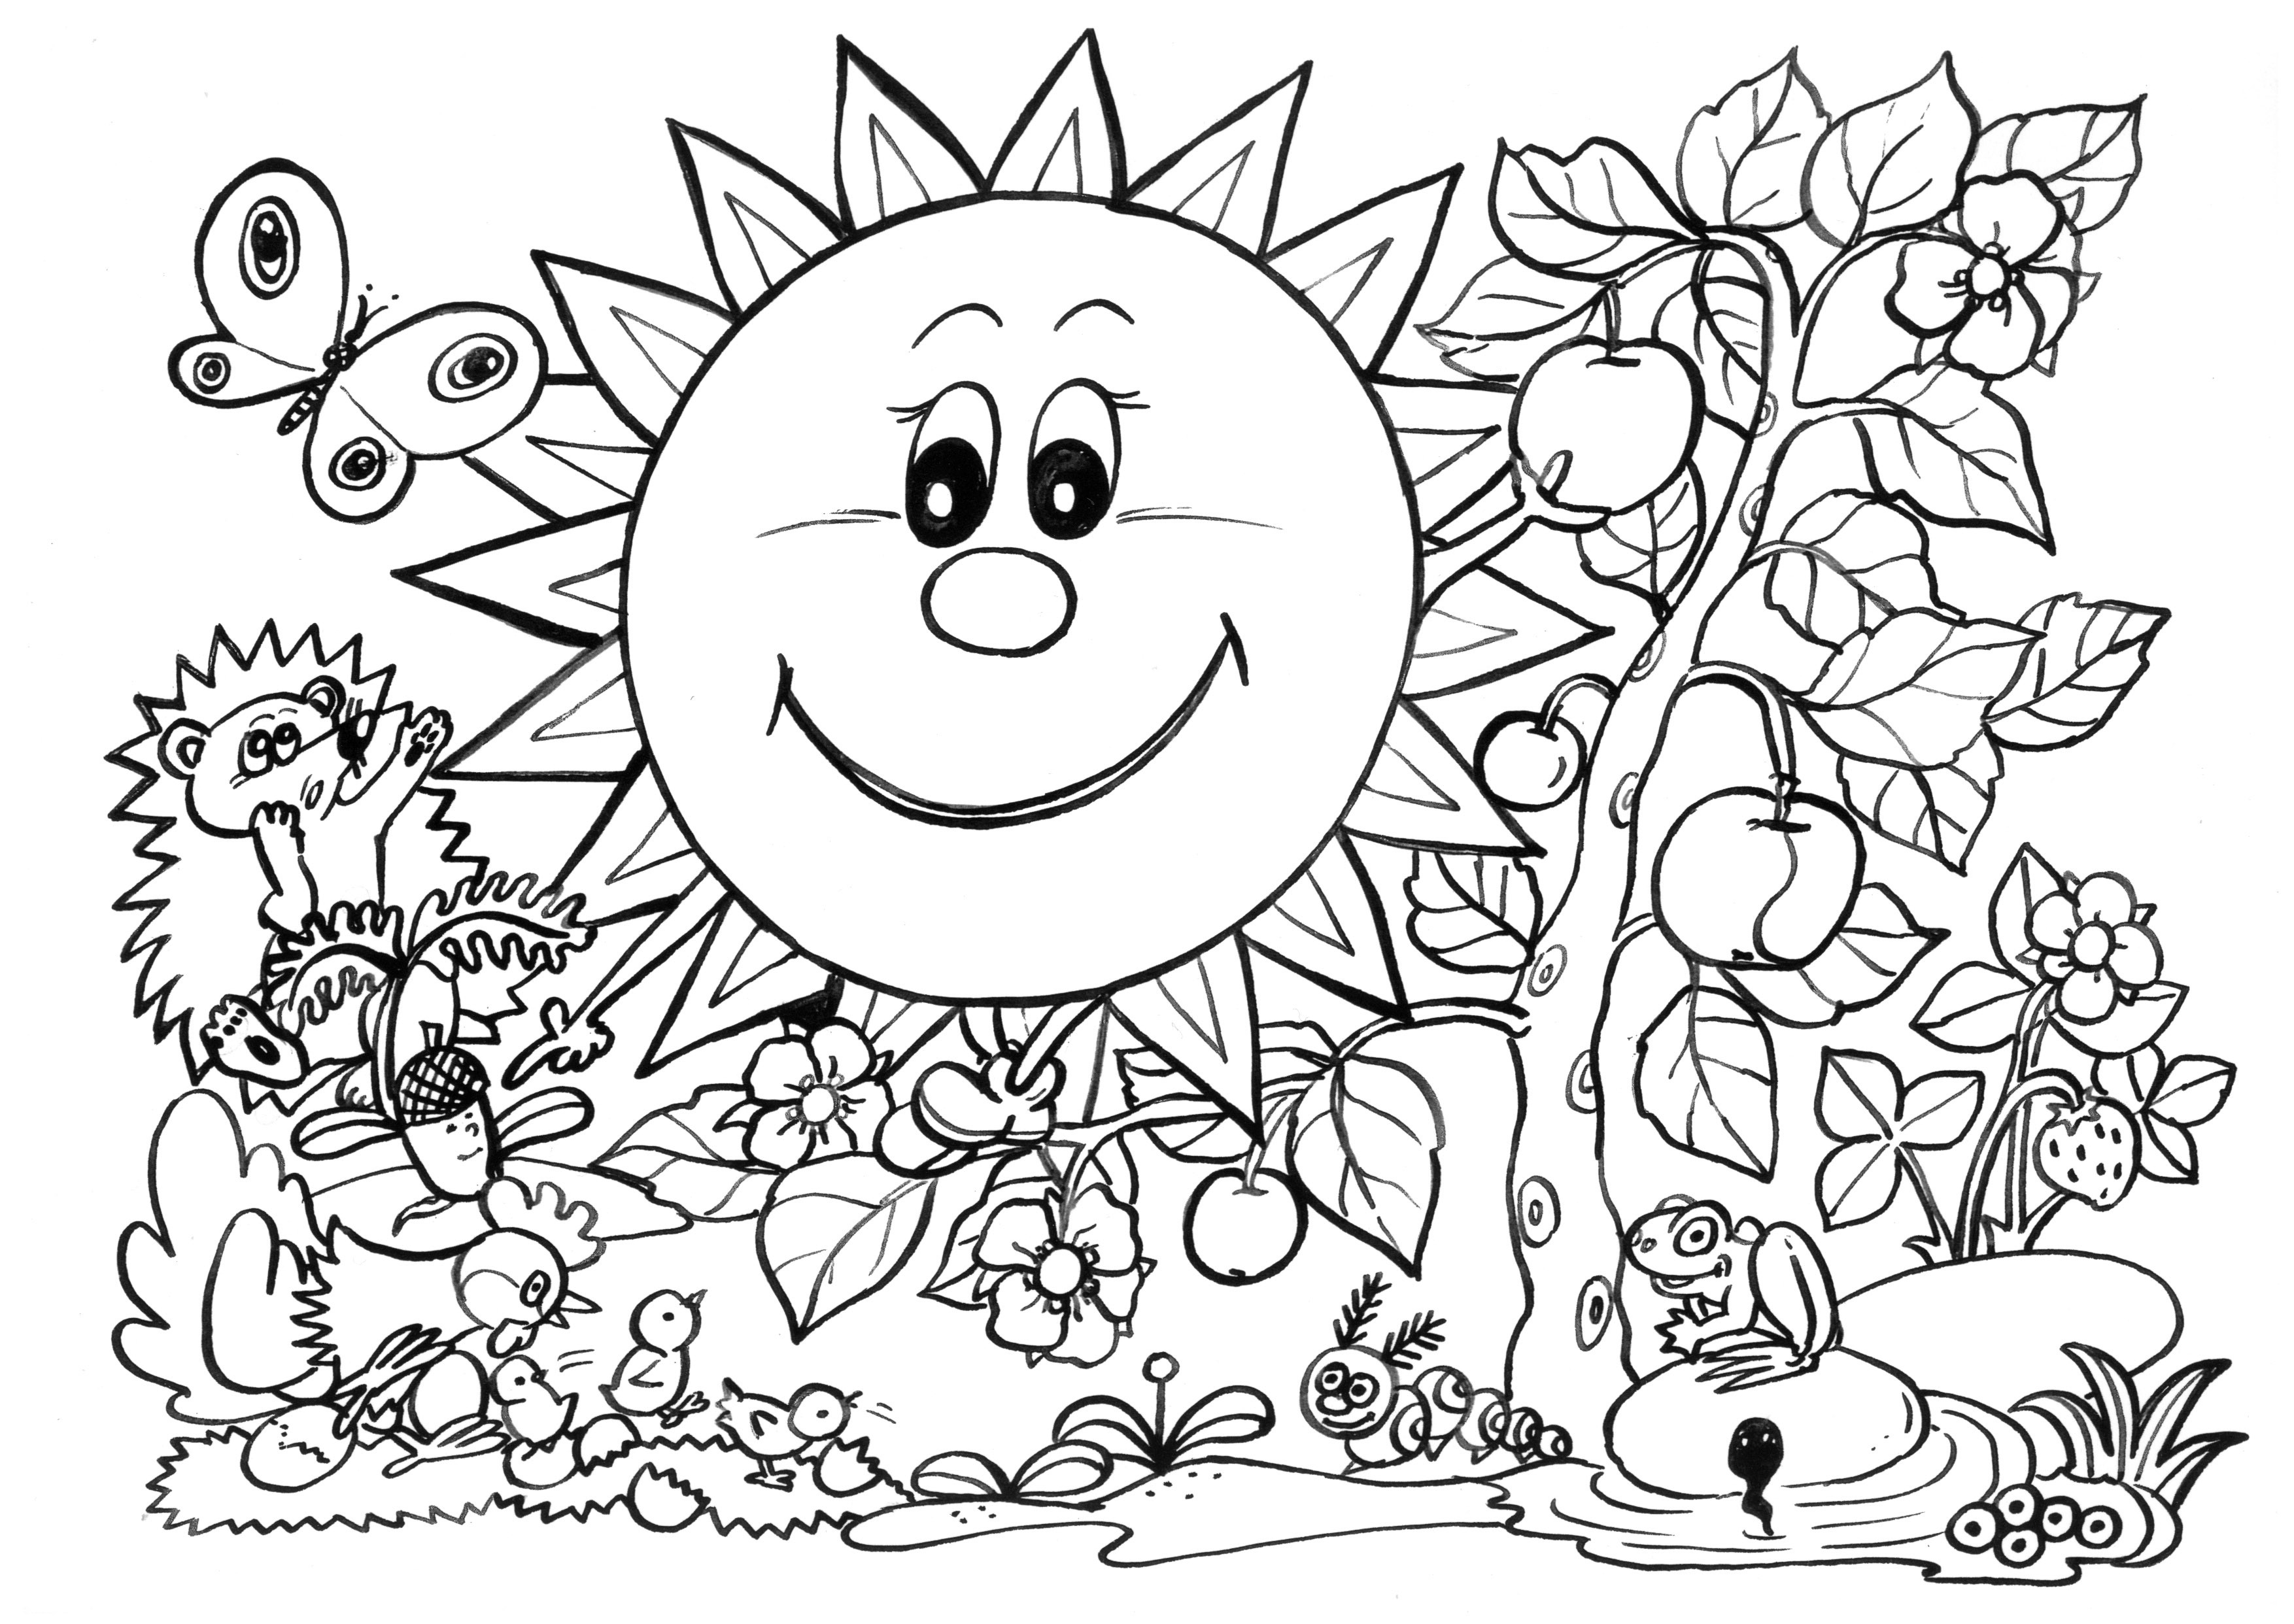 How To Print Coloring Pages Large Coloring Pages To Print At Getdrawings Free For Personal